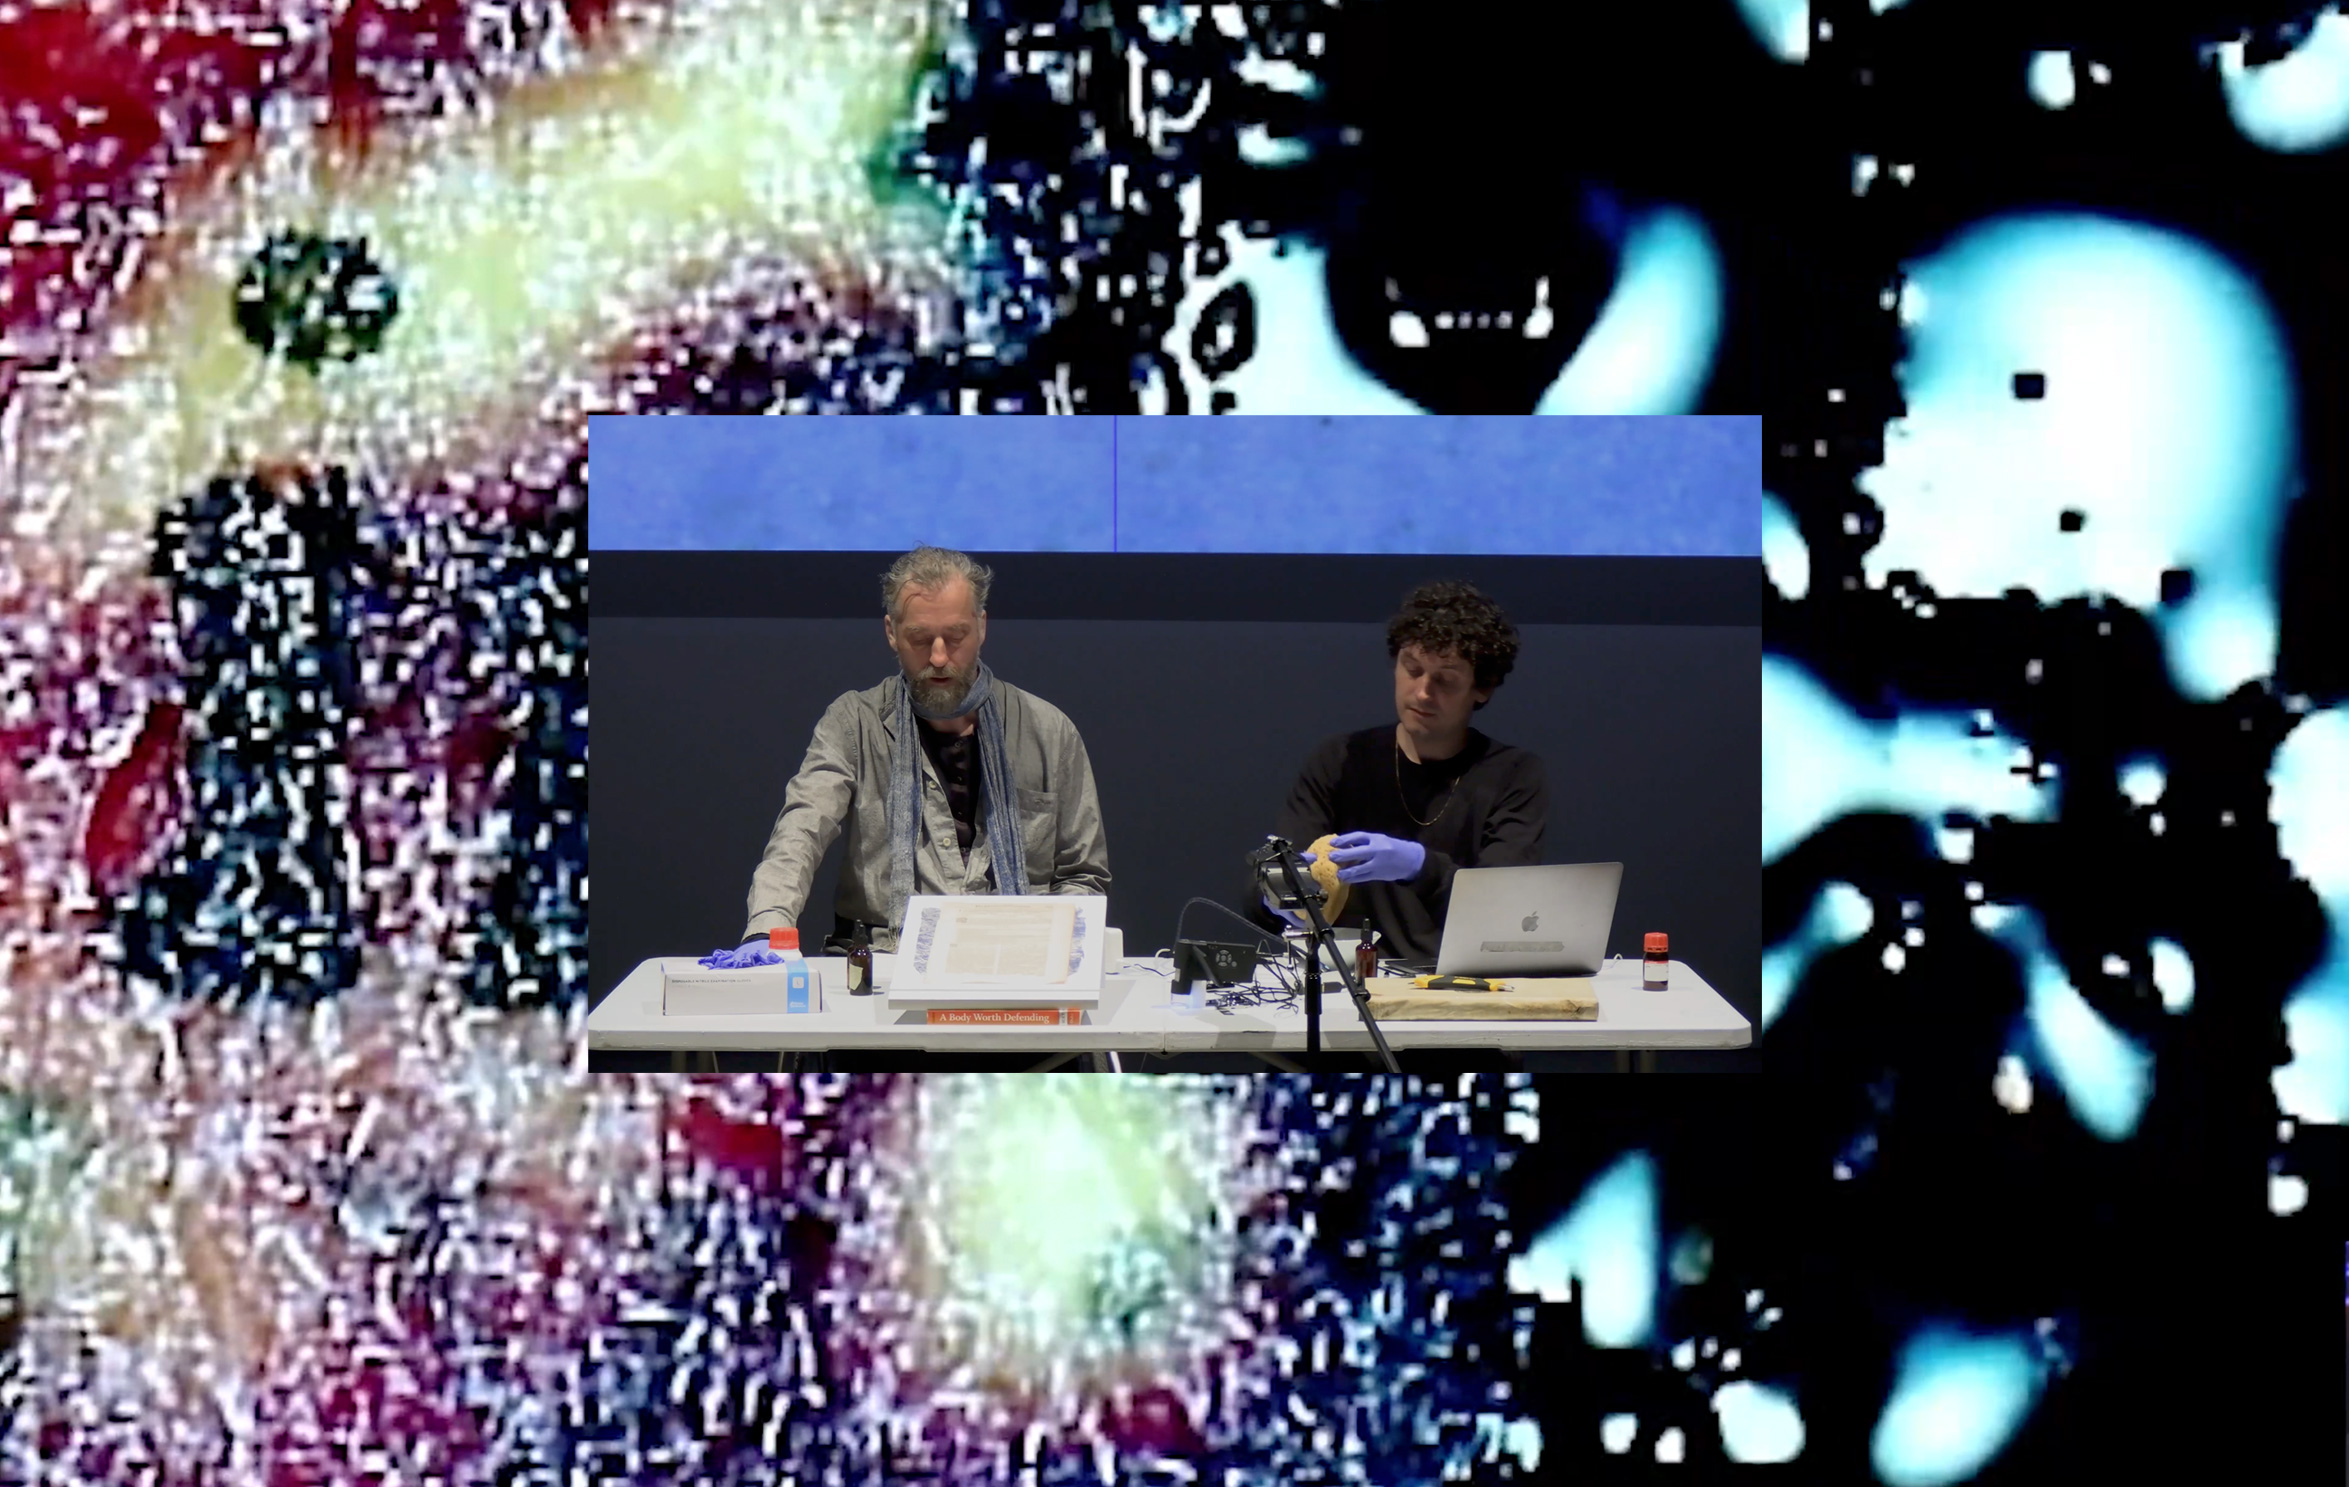 An image of two men giving a lecture superimposed onto a blurry abstract image 